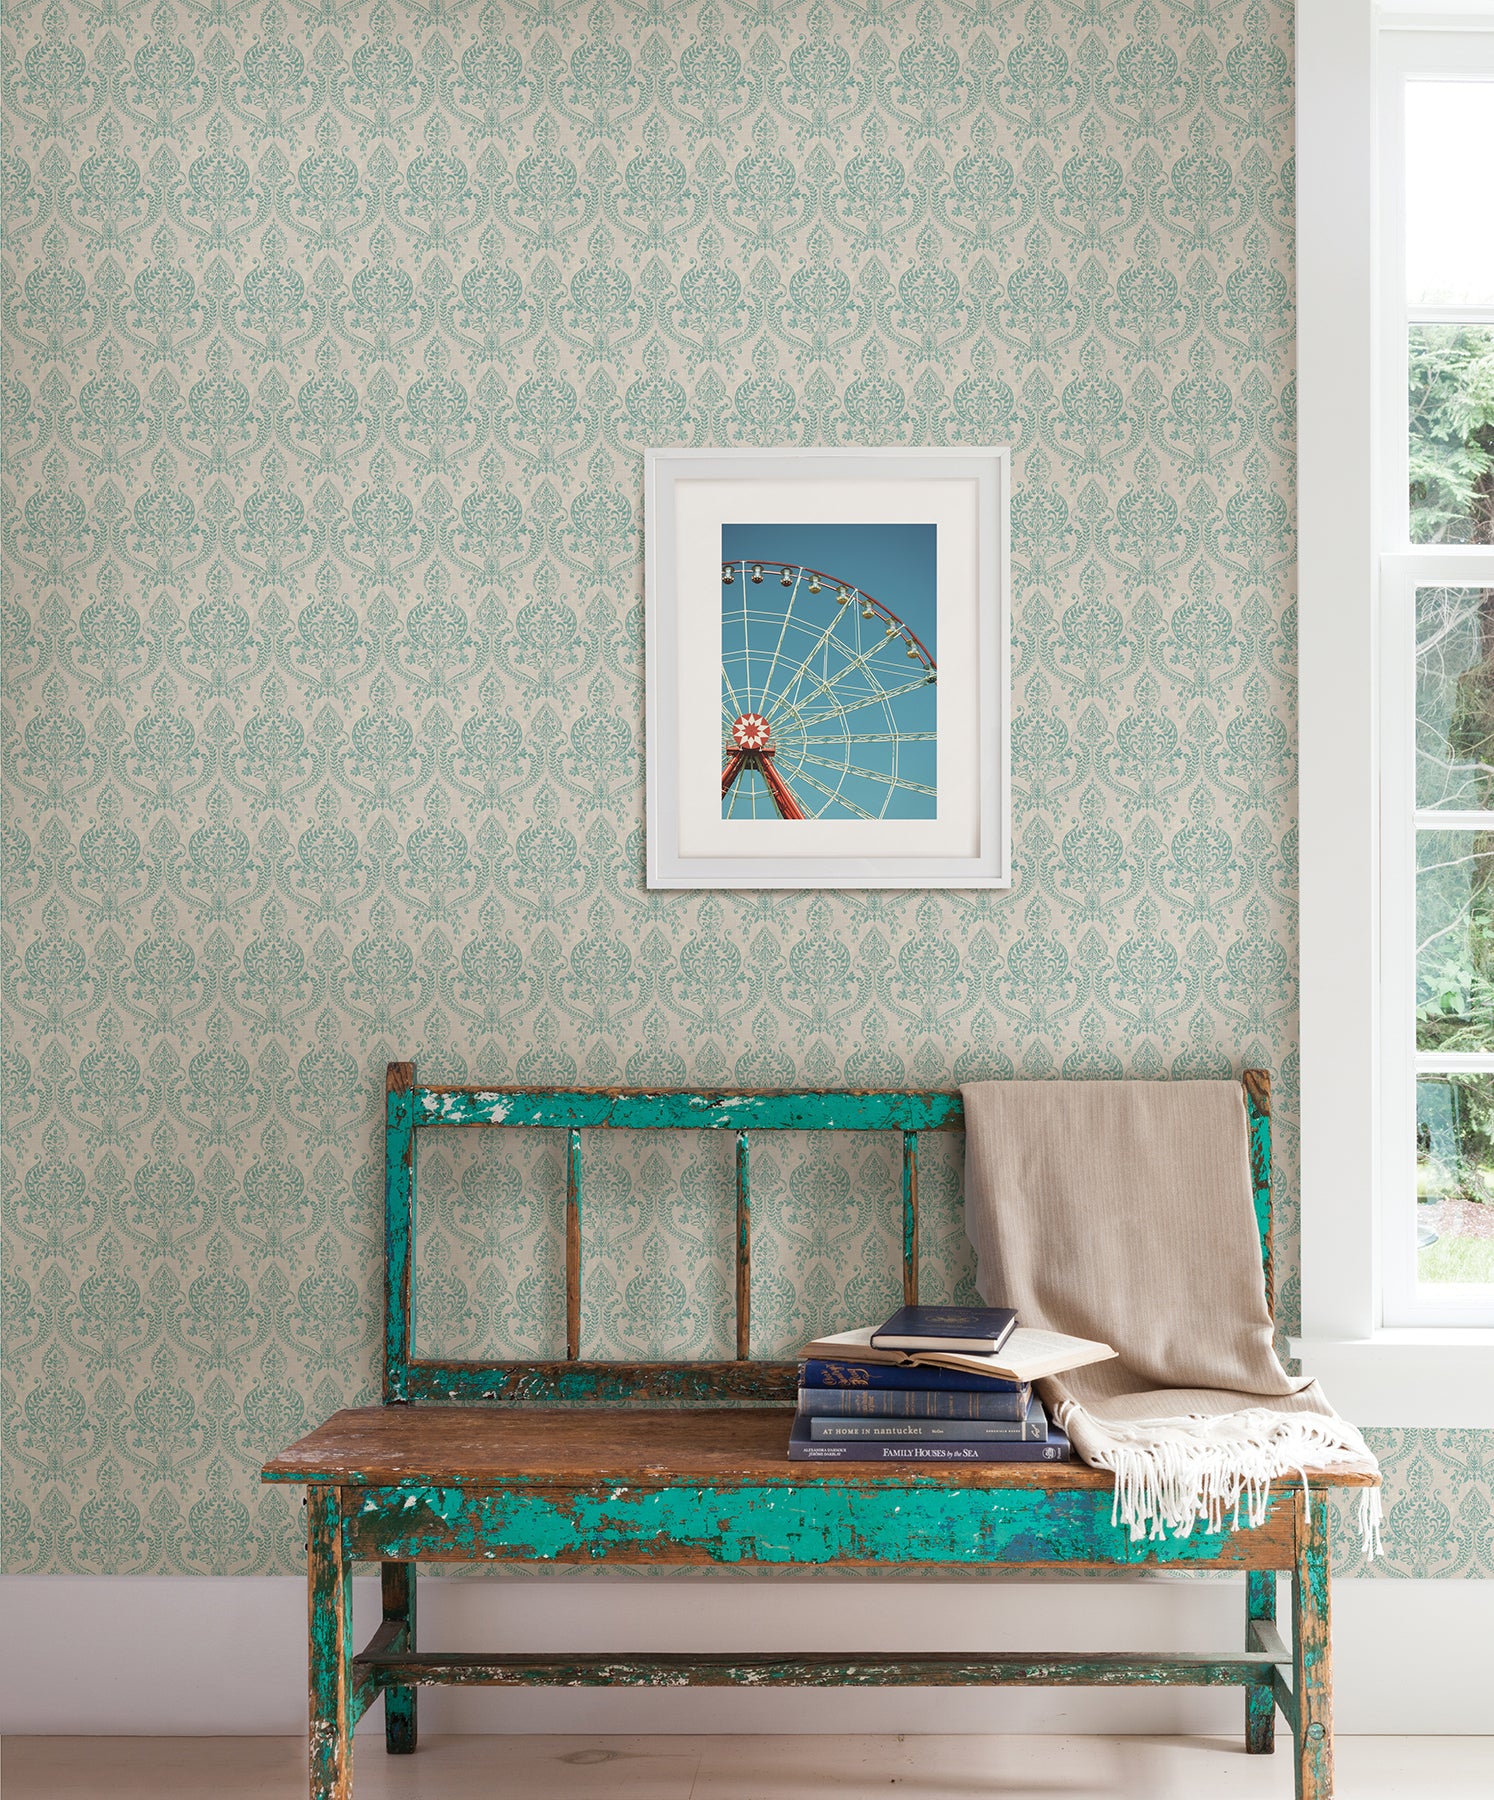 Looking for 1014-001819 Kismet Turquoise Waverly Turquoise Petite Damask Wallpaper A Street Prints Wallpaper